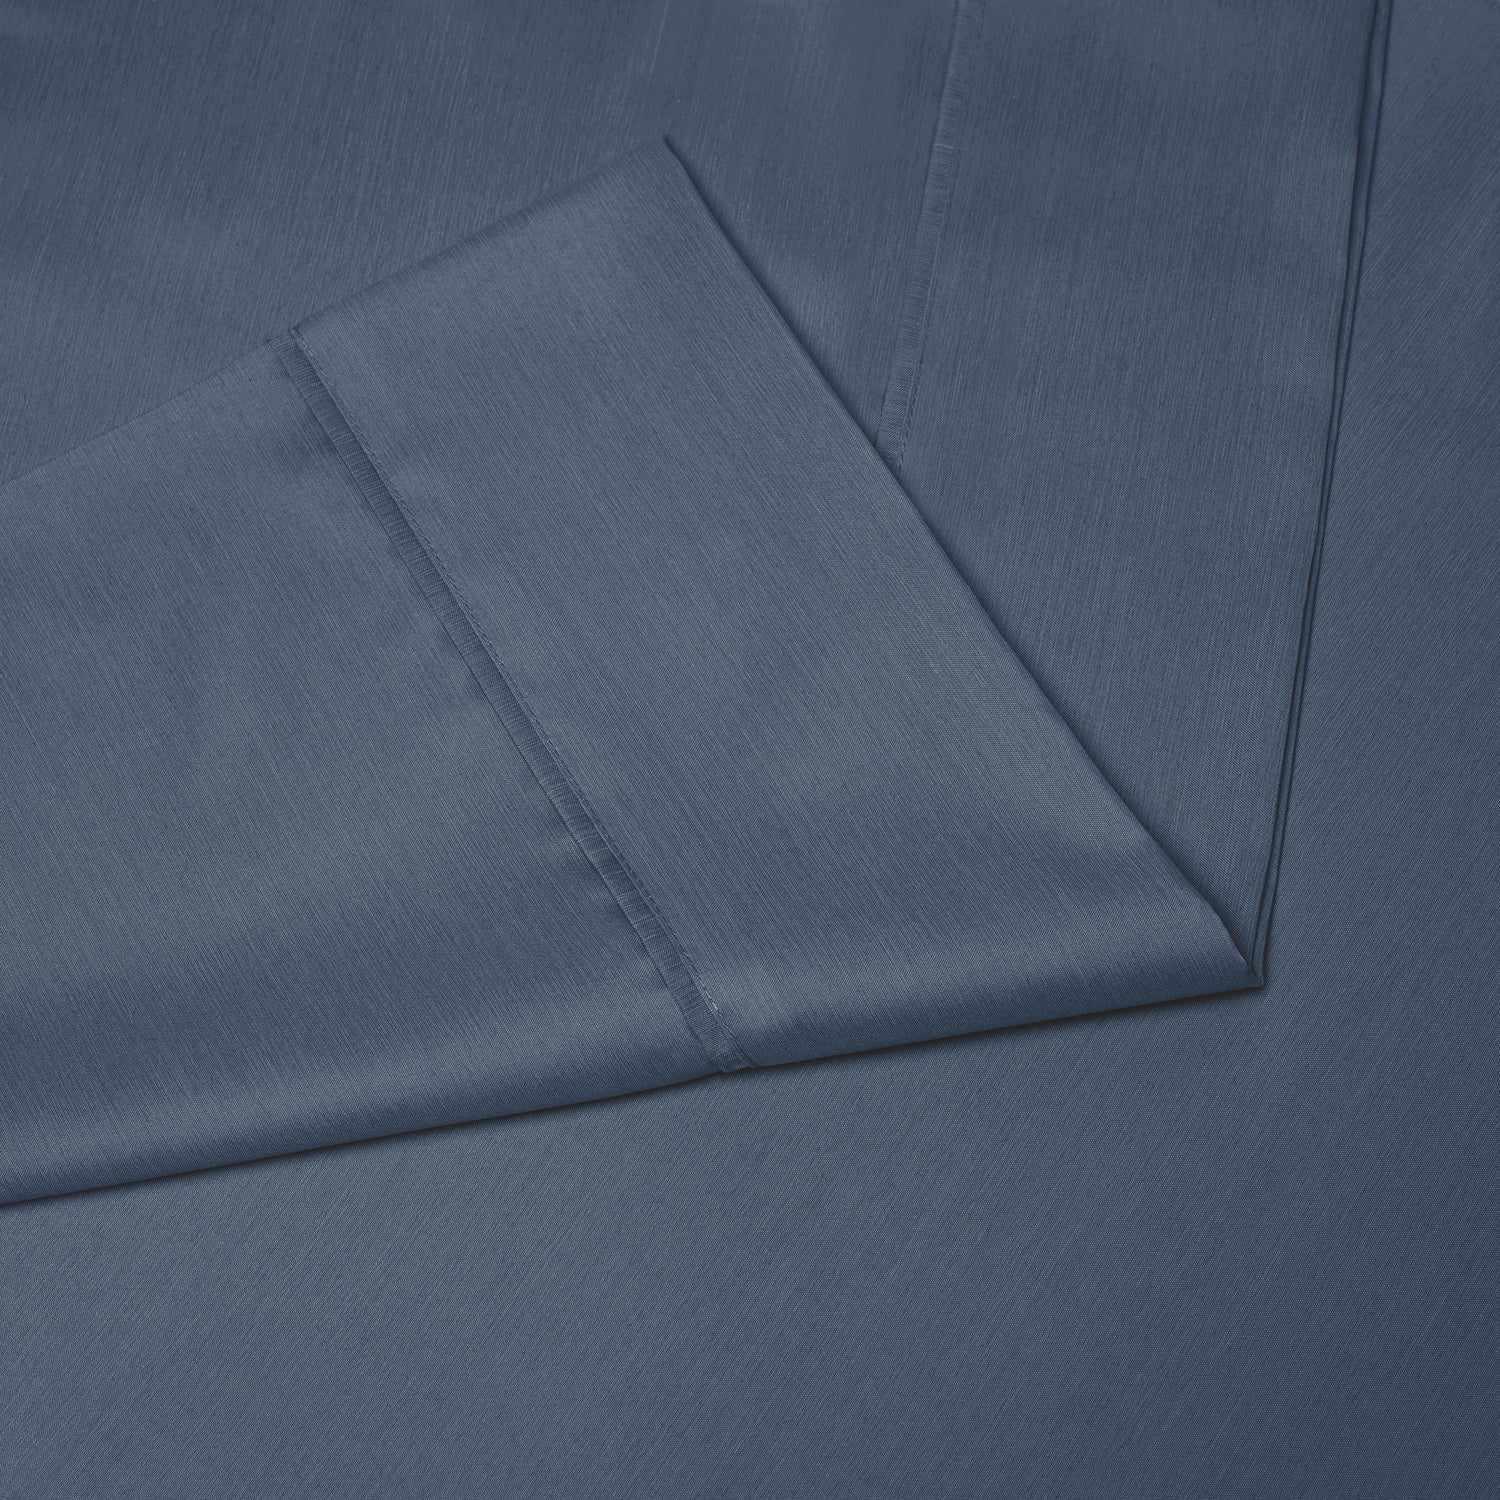  Superior Solid Rayon From Bamboo and Microfiber Blend Sheet Set - Navy Blue